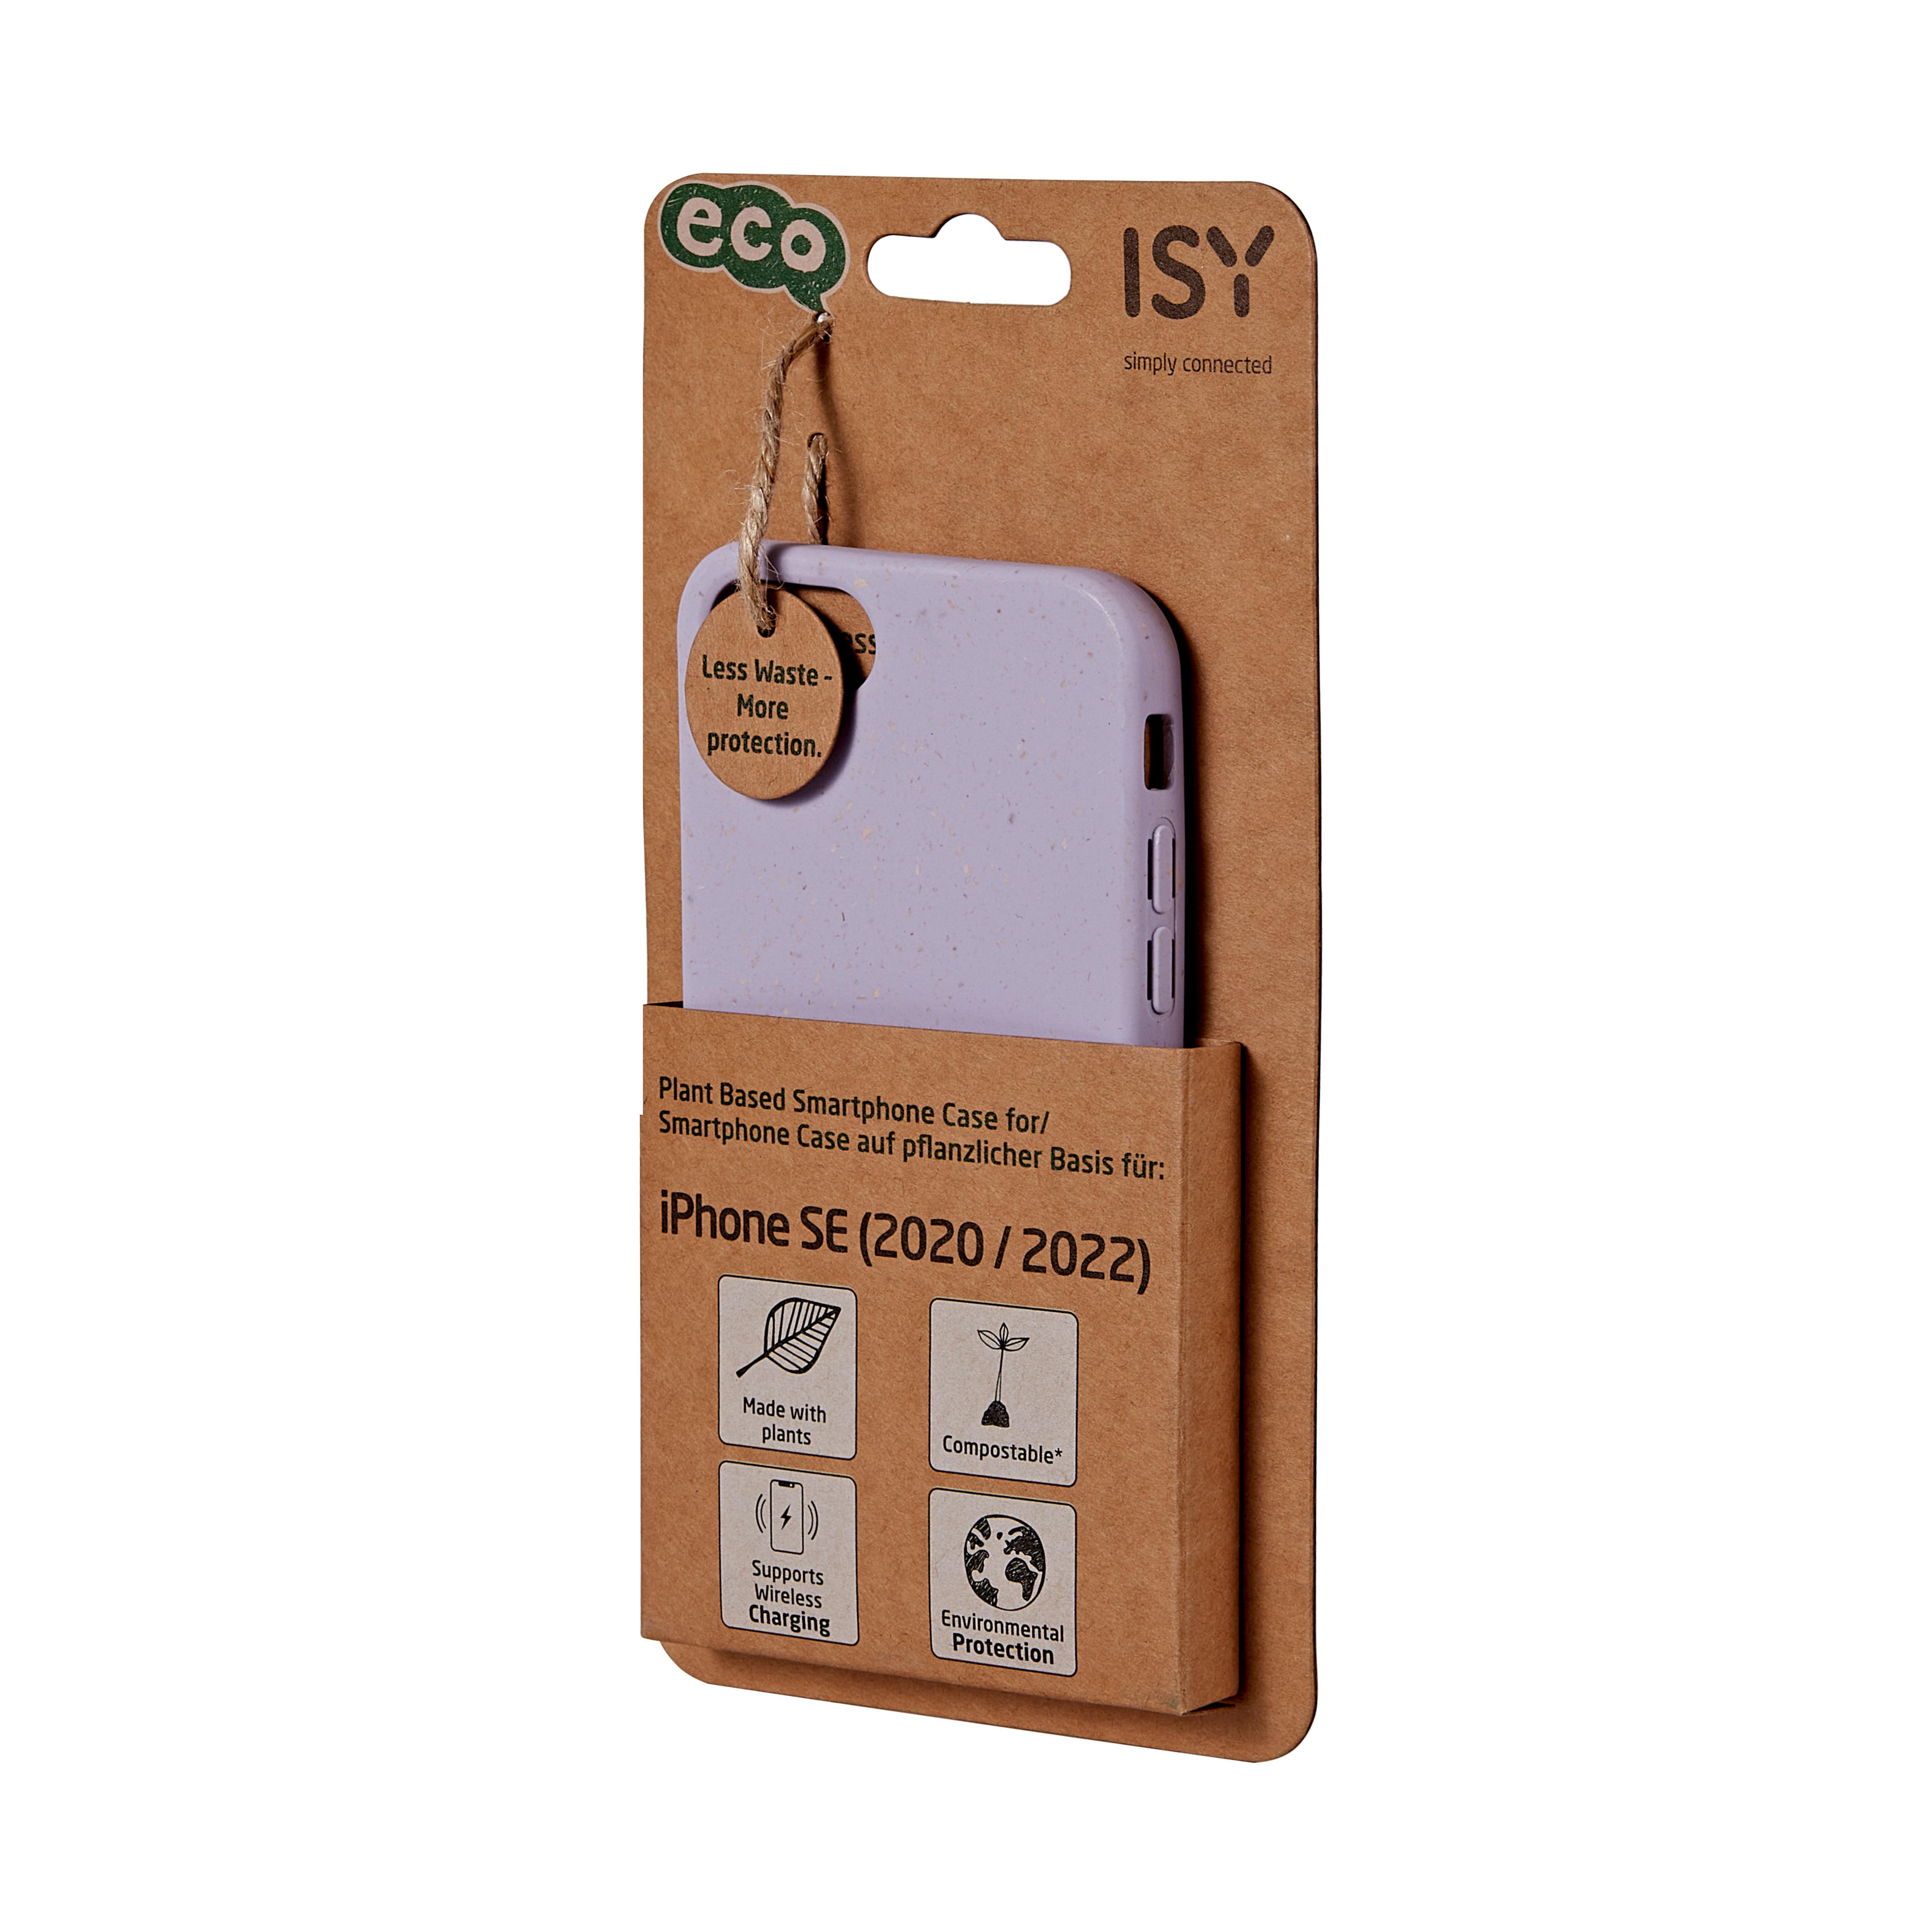 ISY Violett SE, Backcover, Apple, ISC-6006, iPhone Biocase,